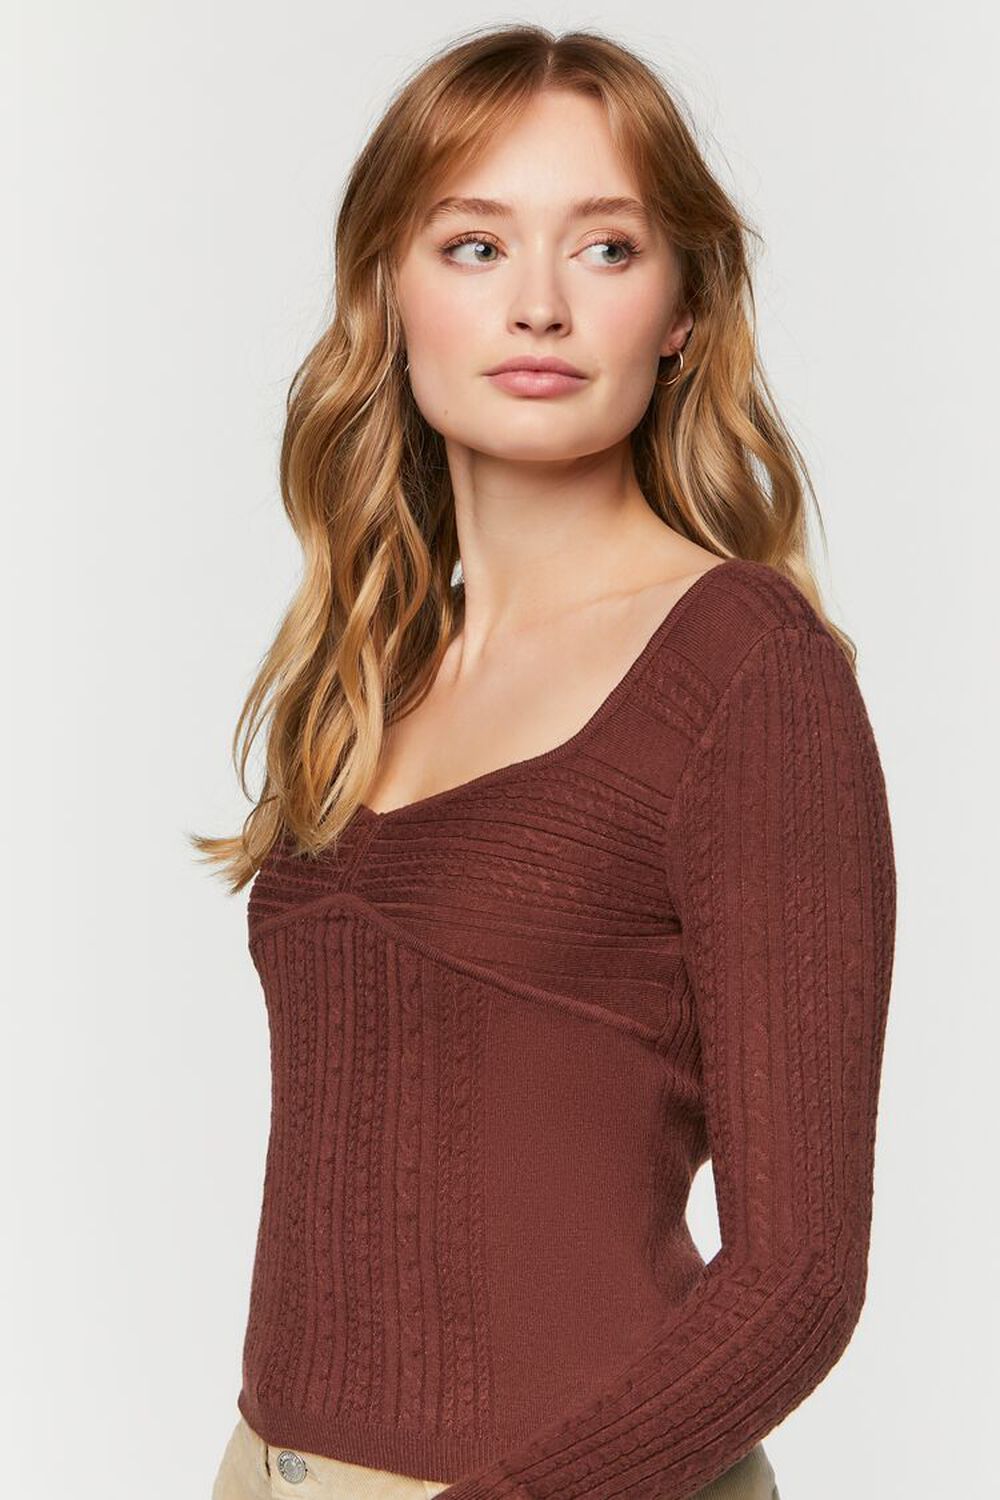 BROWN Fitted Cable Knit Sweater, image 2